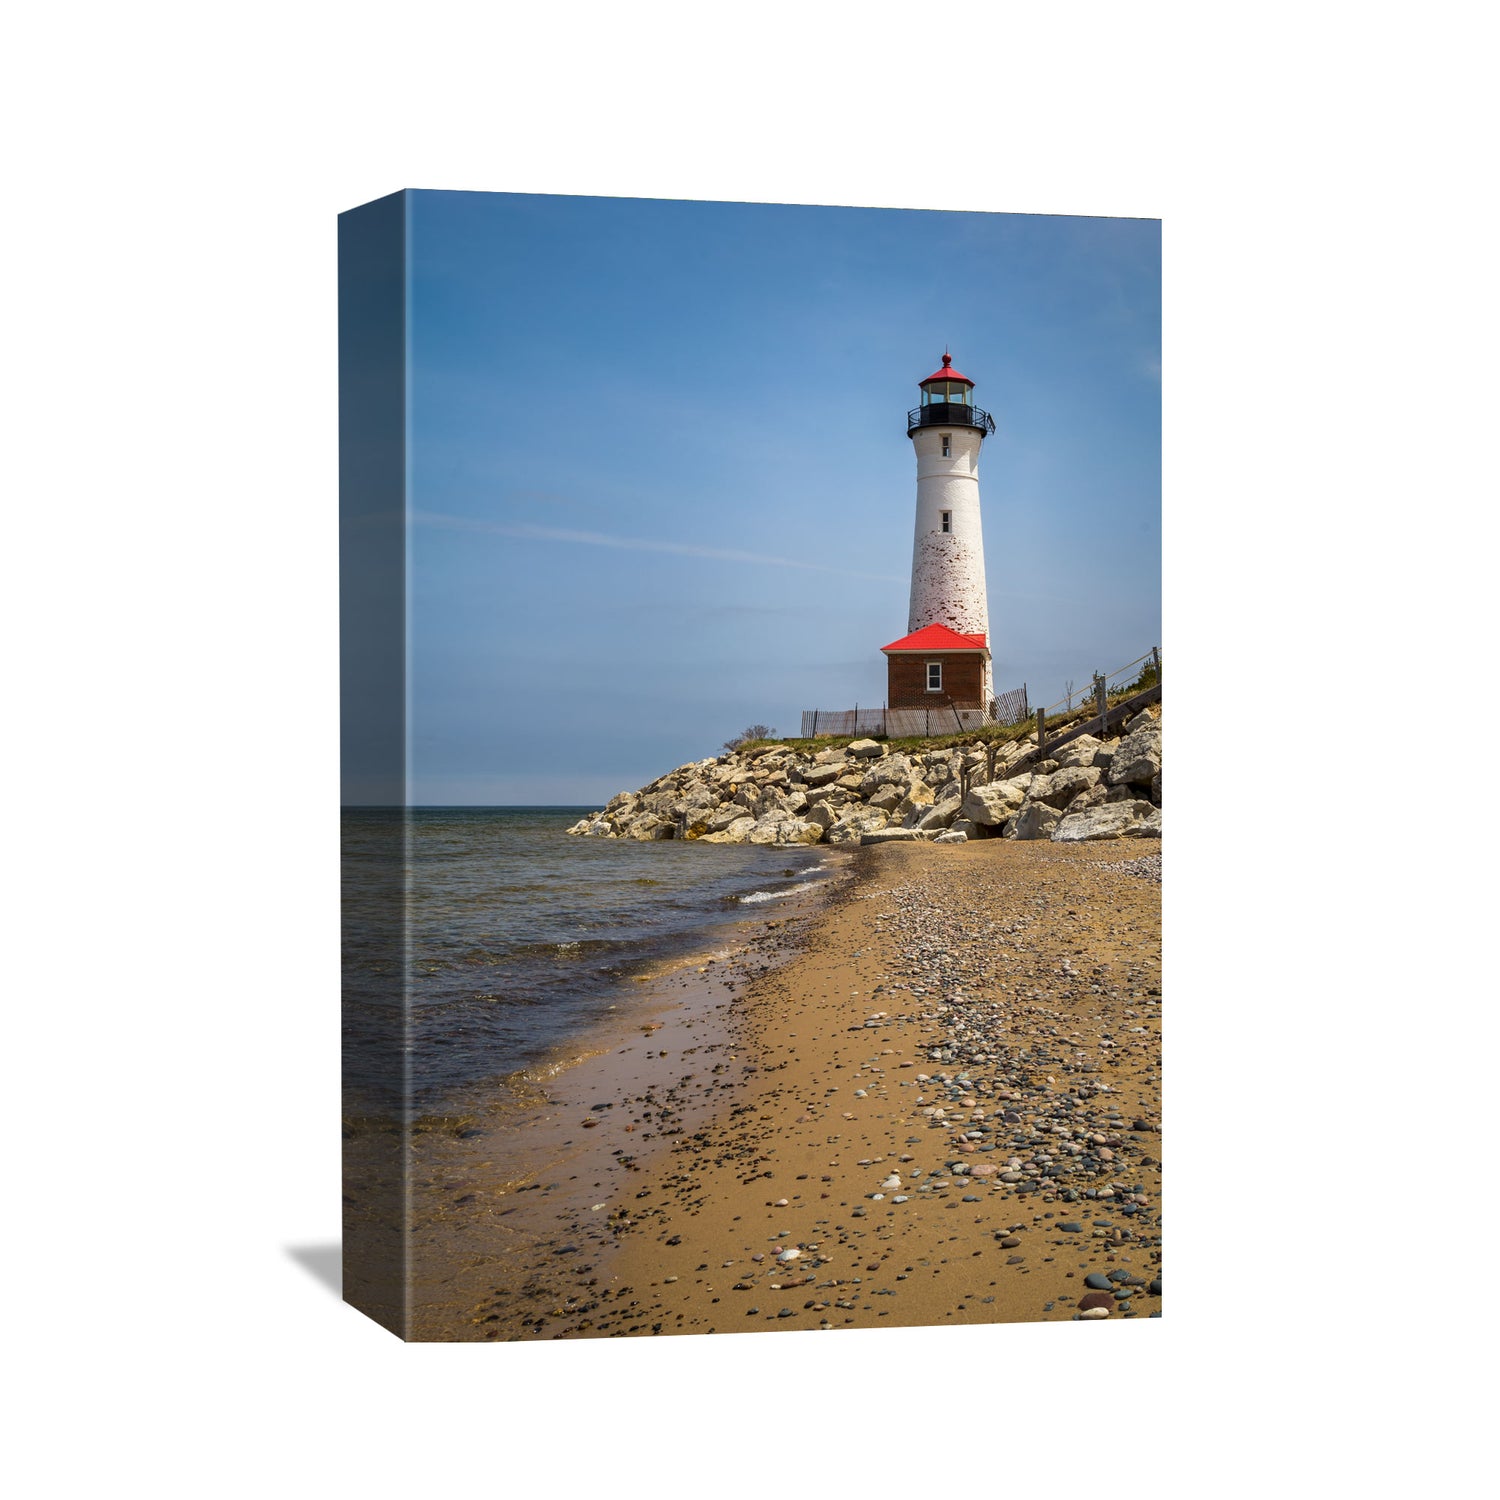 Artistic photography print capturing the picturesque Crisp Point Lighthouse near the water's edge, highlighting the contrast between the red-roofed structure and the natural landscape.